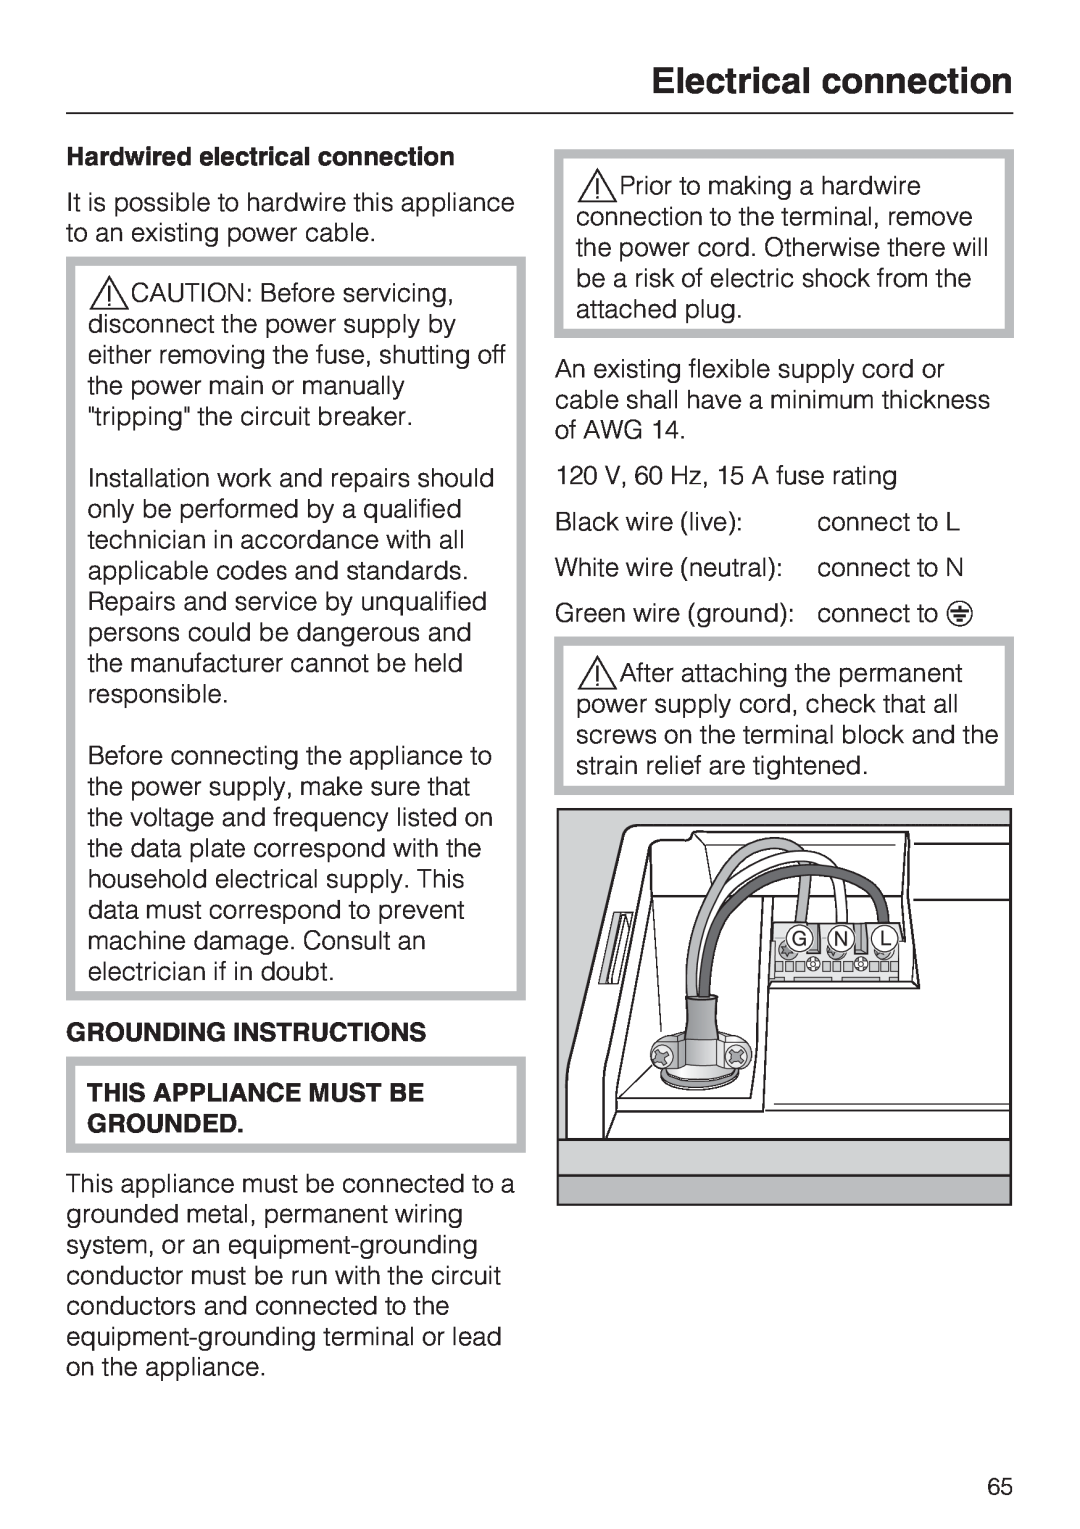 Miele G 5670, G 5675 manual Electrical connection, Hardwired electrical connection, Grounding Instructions 